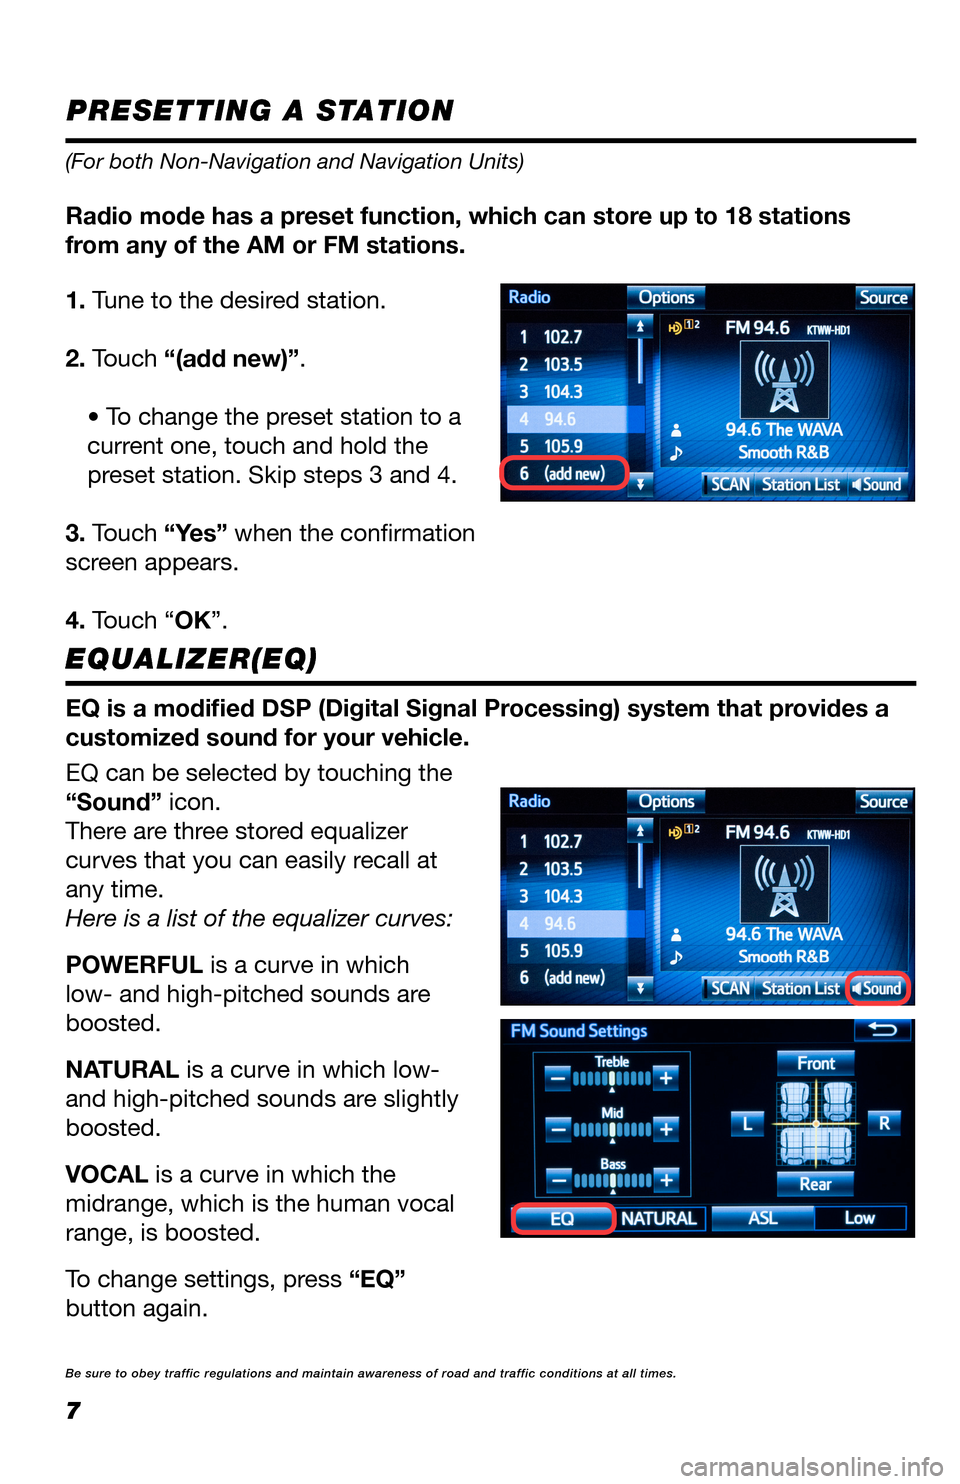 TOYOTA GT86 2017 1.G Navigation Manual 7
PRESETTING A STATION
EQUALIZER(EQ)
1. Tune to the desired station.
2. Touch “(add new)”.
• To change the preset station to a
current one, touch and hold the
preset station. Skip steps 3 and 4.